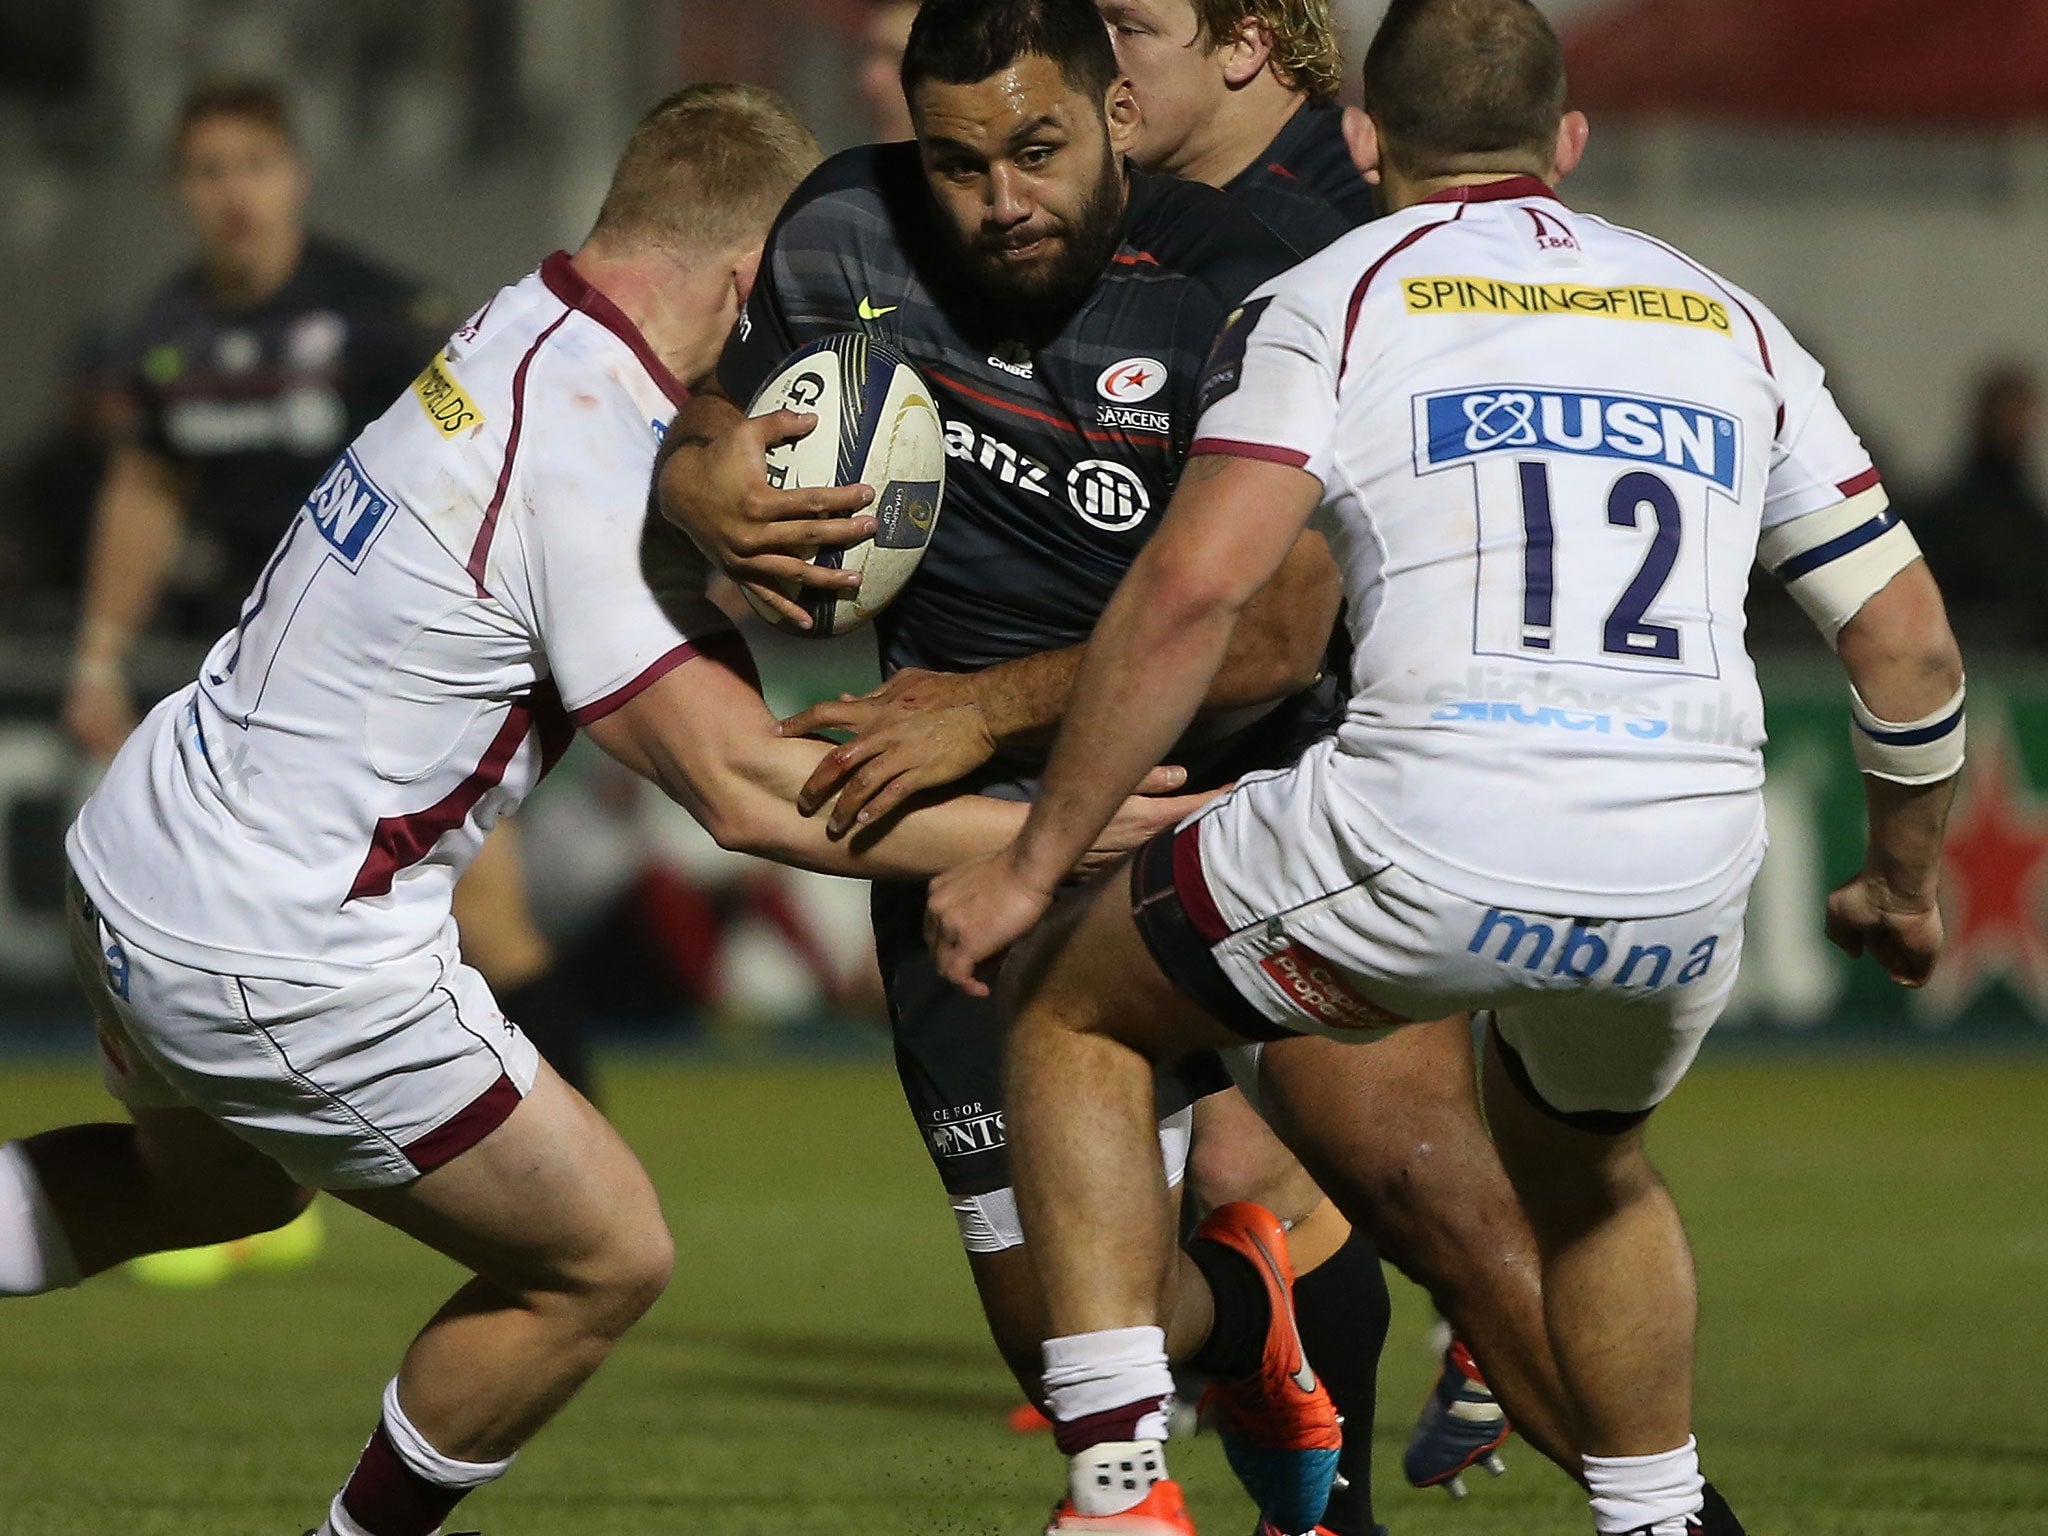 Saracens tryscorer Billy Vunipola says he must not get over-confident and skip extra training